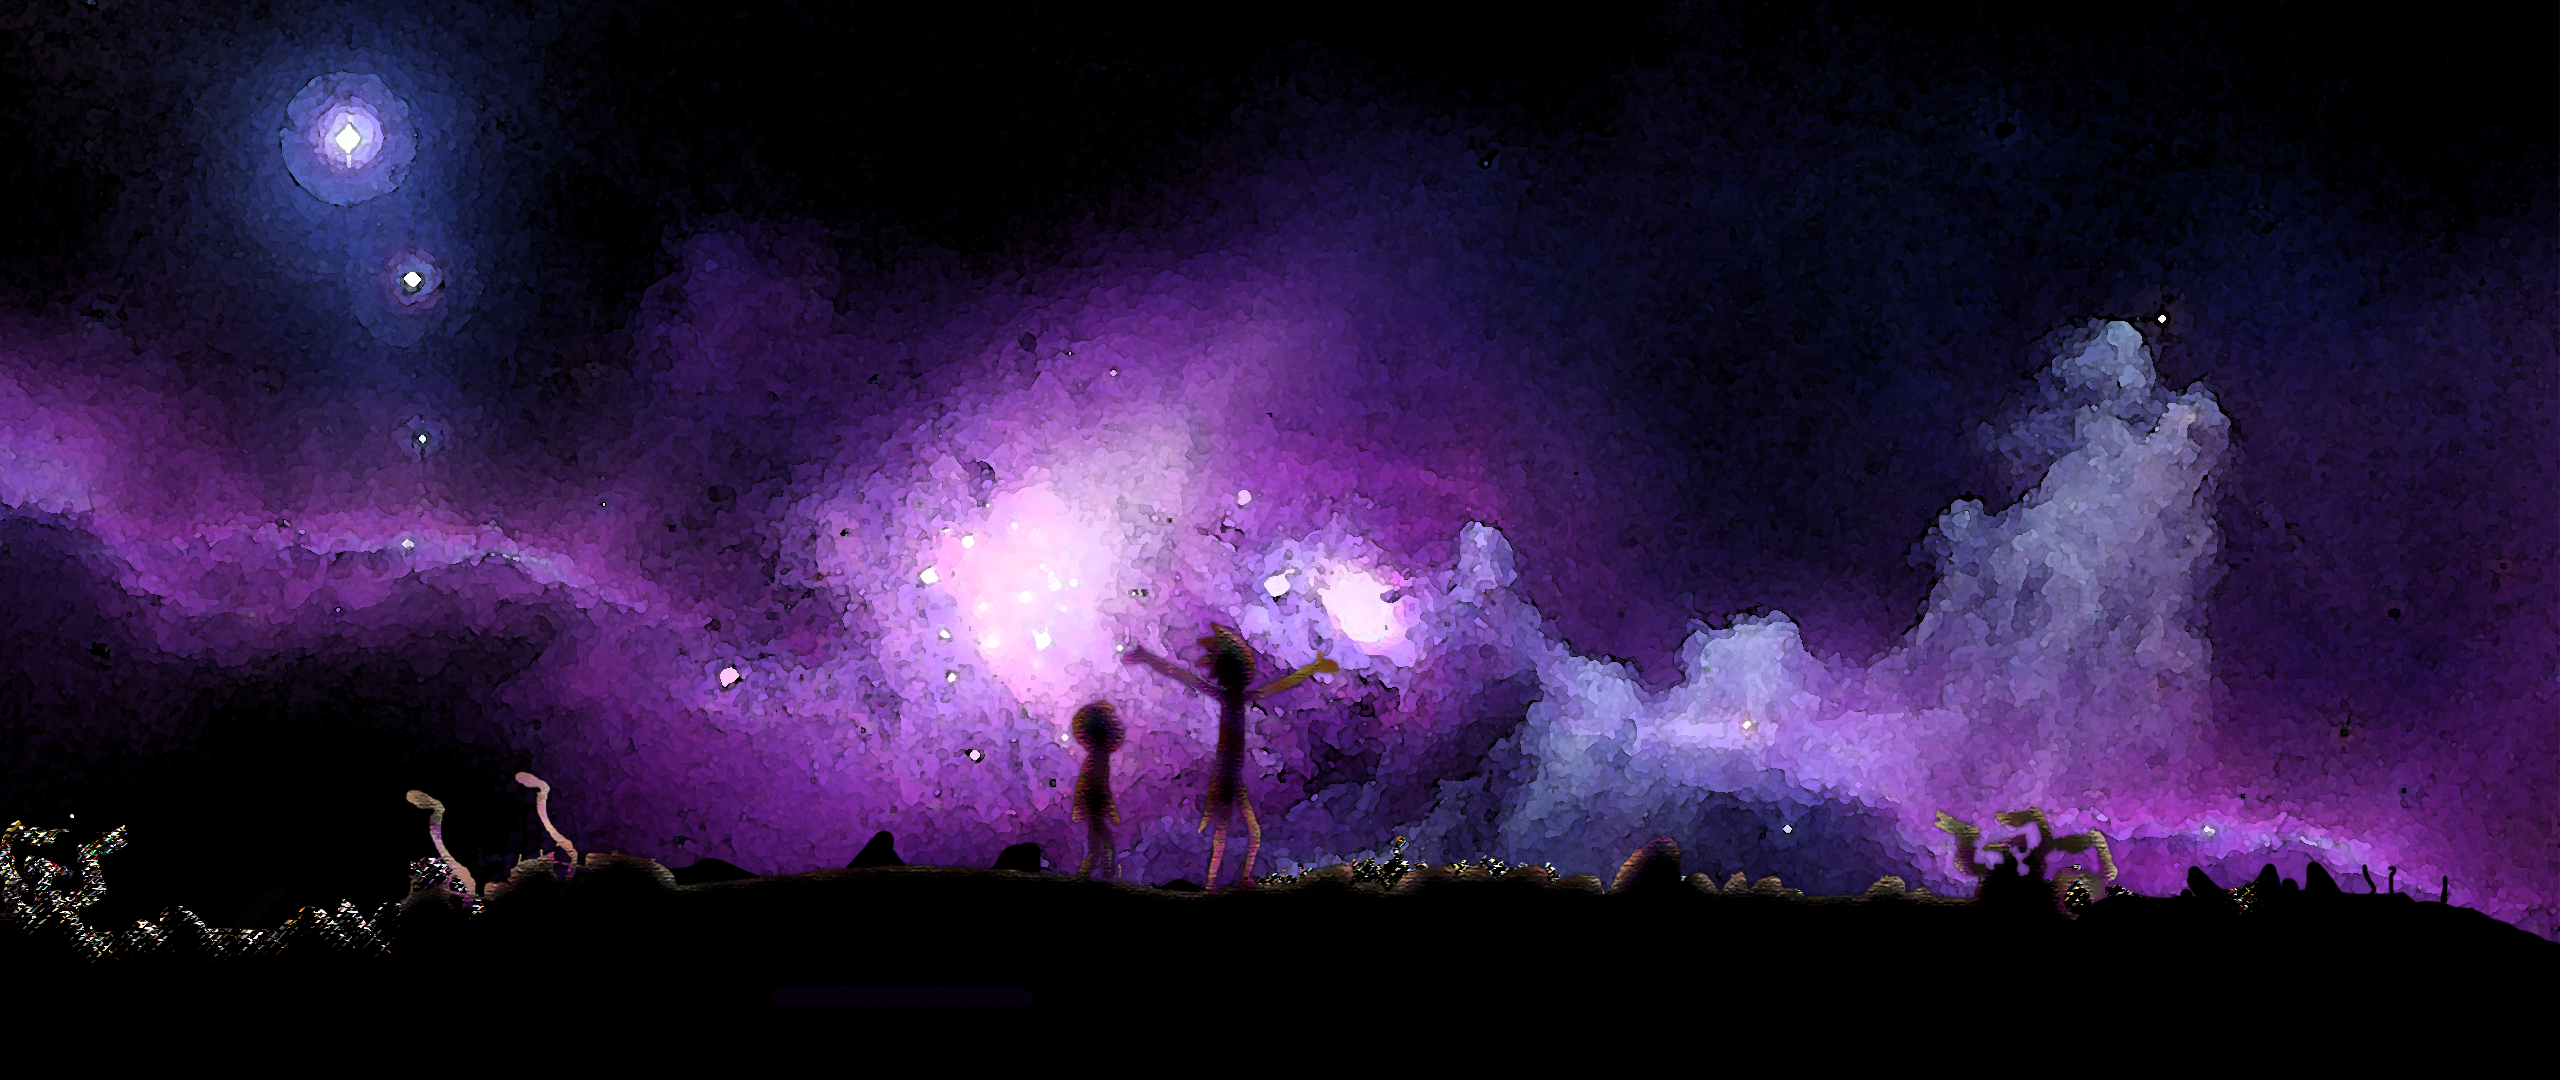 rick and morty wallpaper,sky,purple,nature,violet,darkness